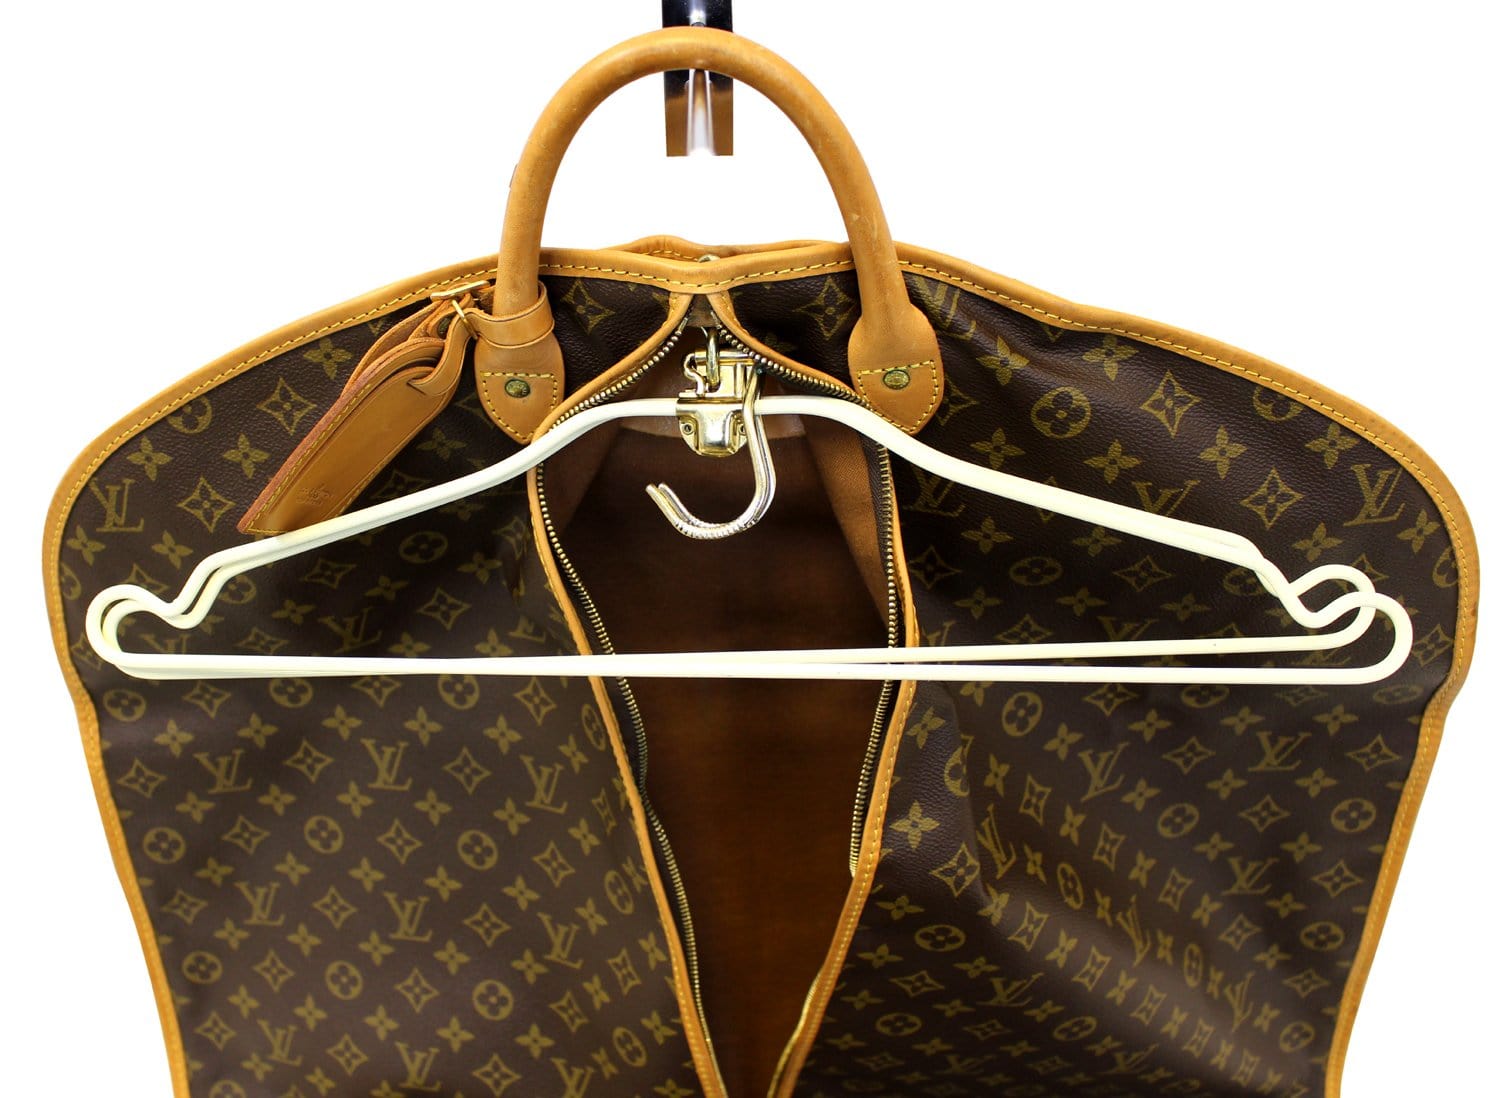 Louis Vuitton 3 Way Bag - 3 For Sale on 1stDibs